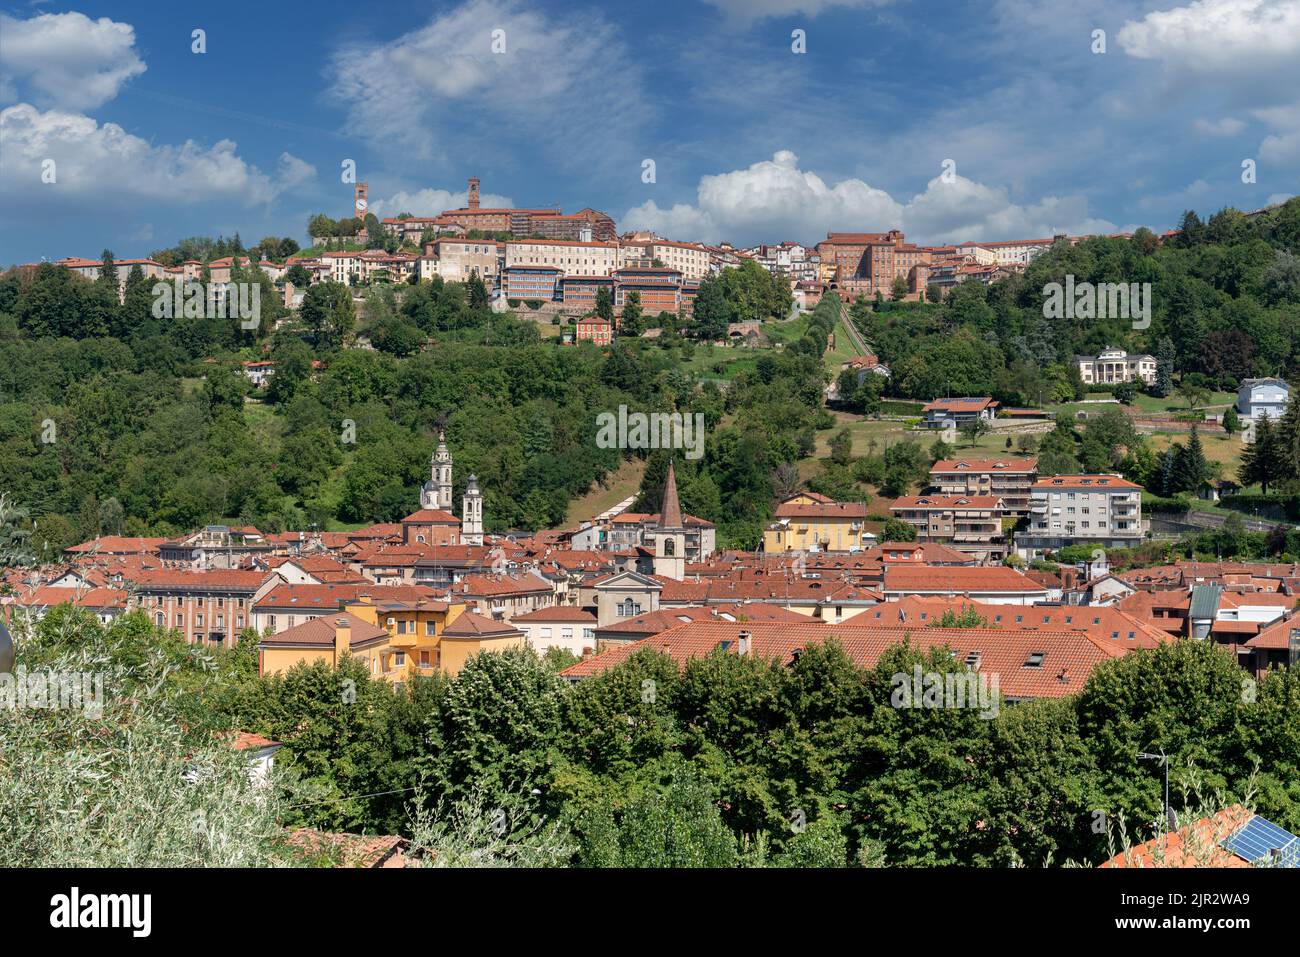 Mondovì, Cuneo, Italy. cityscape with below the Breo district and on the Mondovì hill Piazza with the clock tower and green parks with blue sky with w Stock Photo